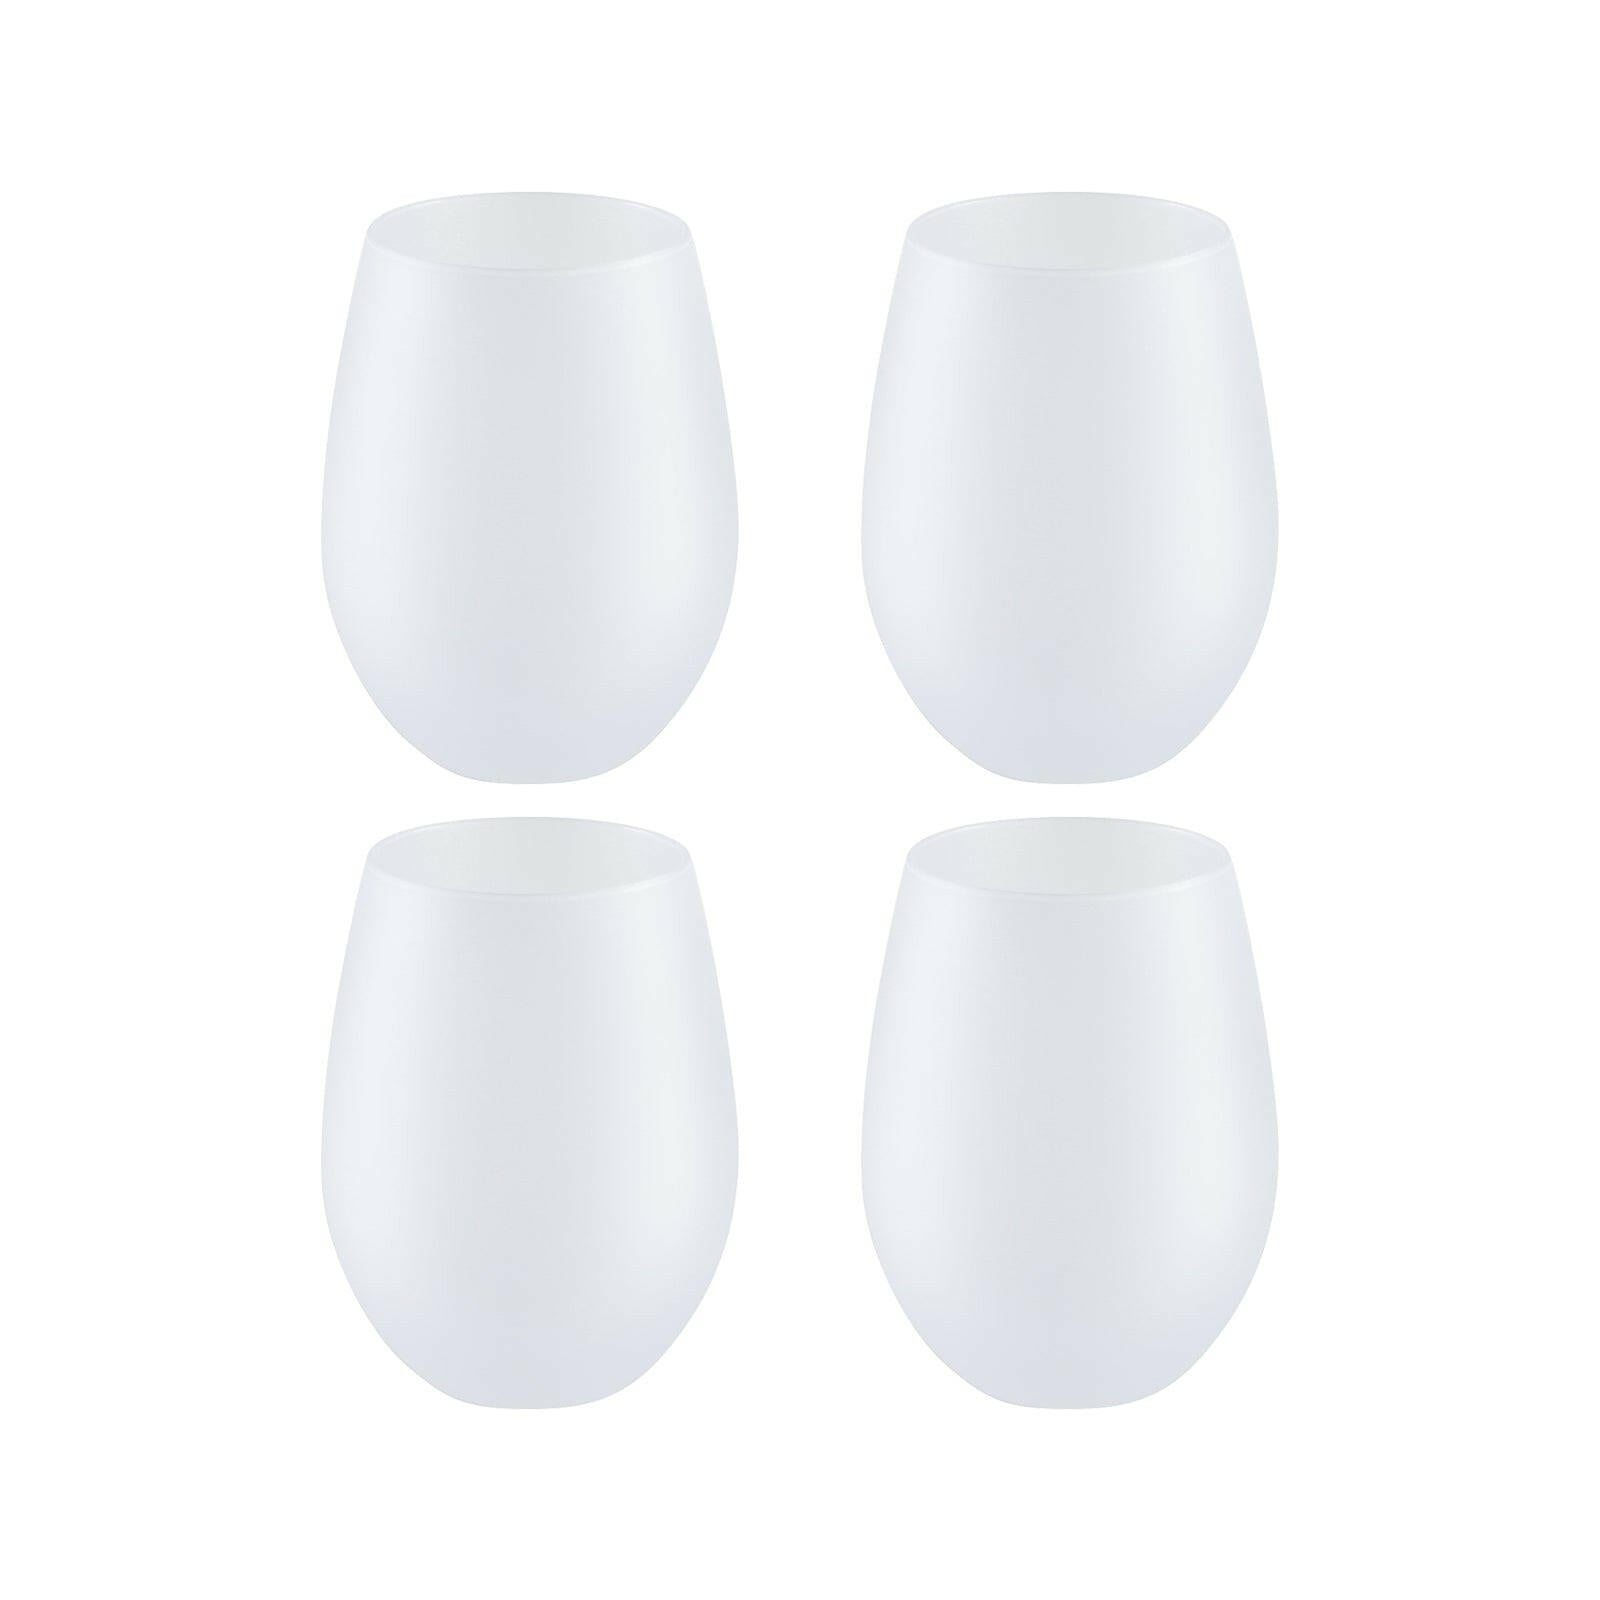 17oz Sublimation Frosted Stemless Wine Glasses - 4 Pack.